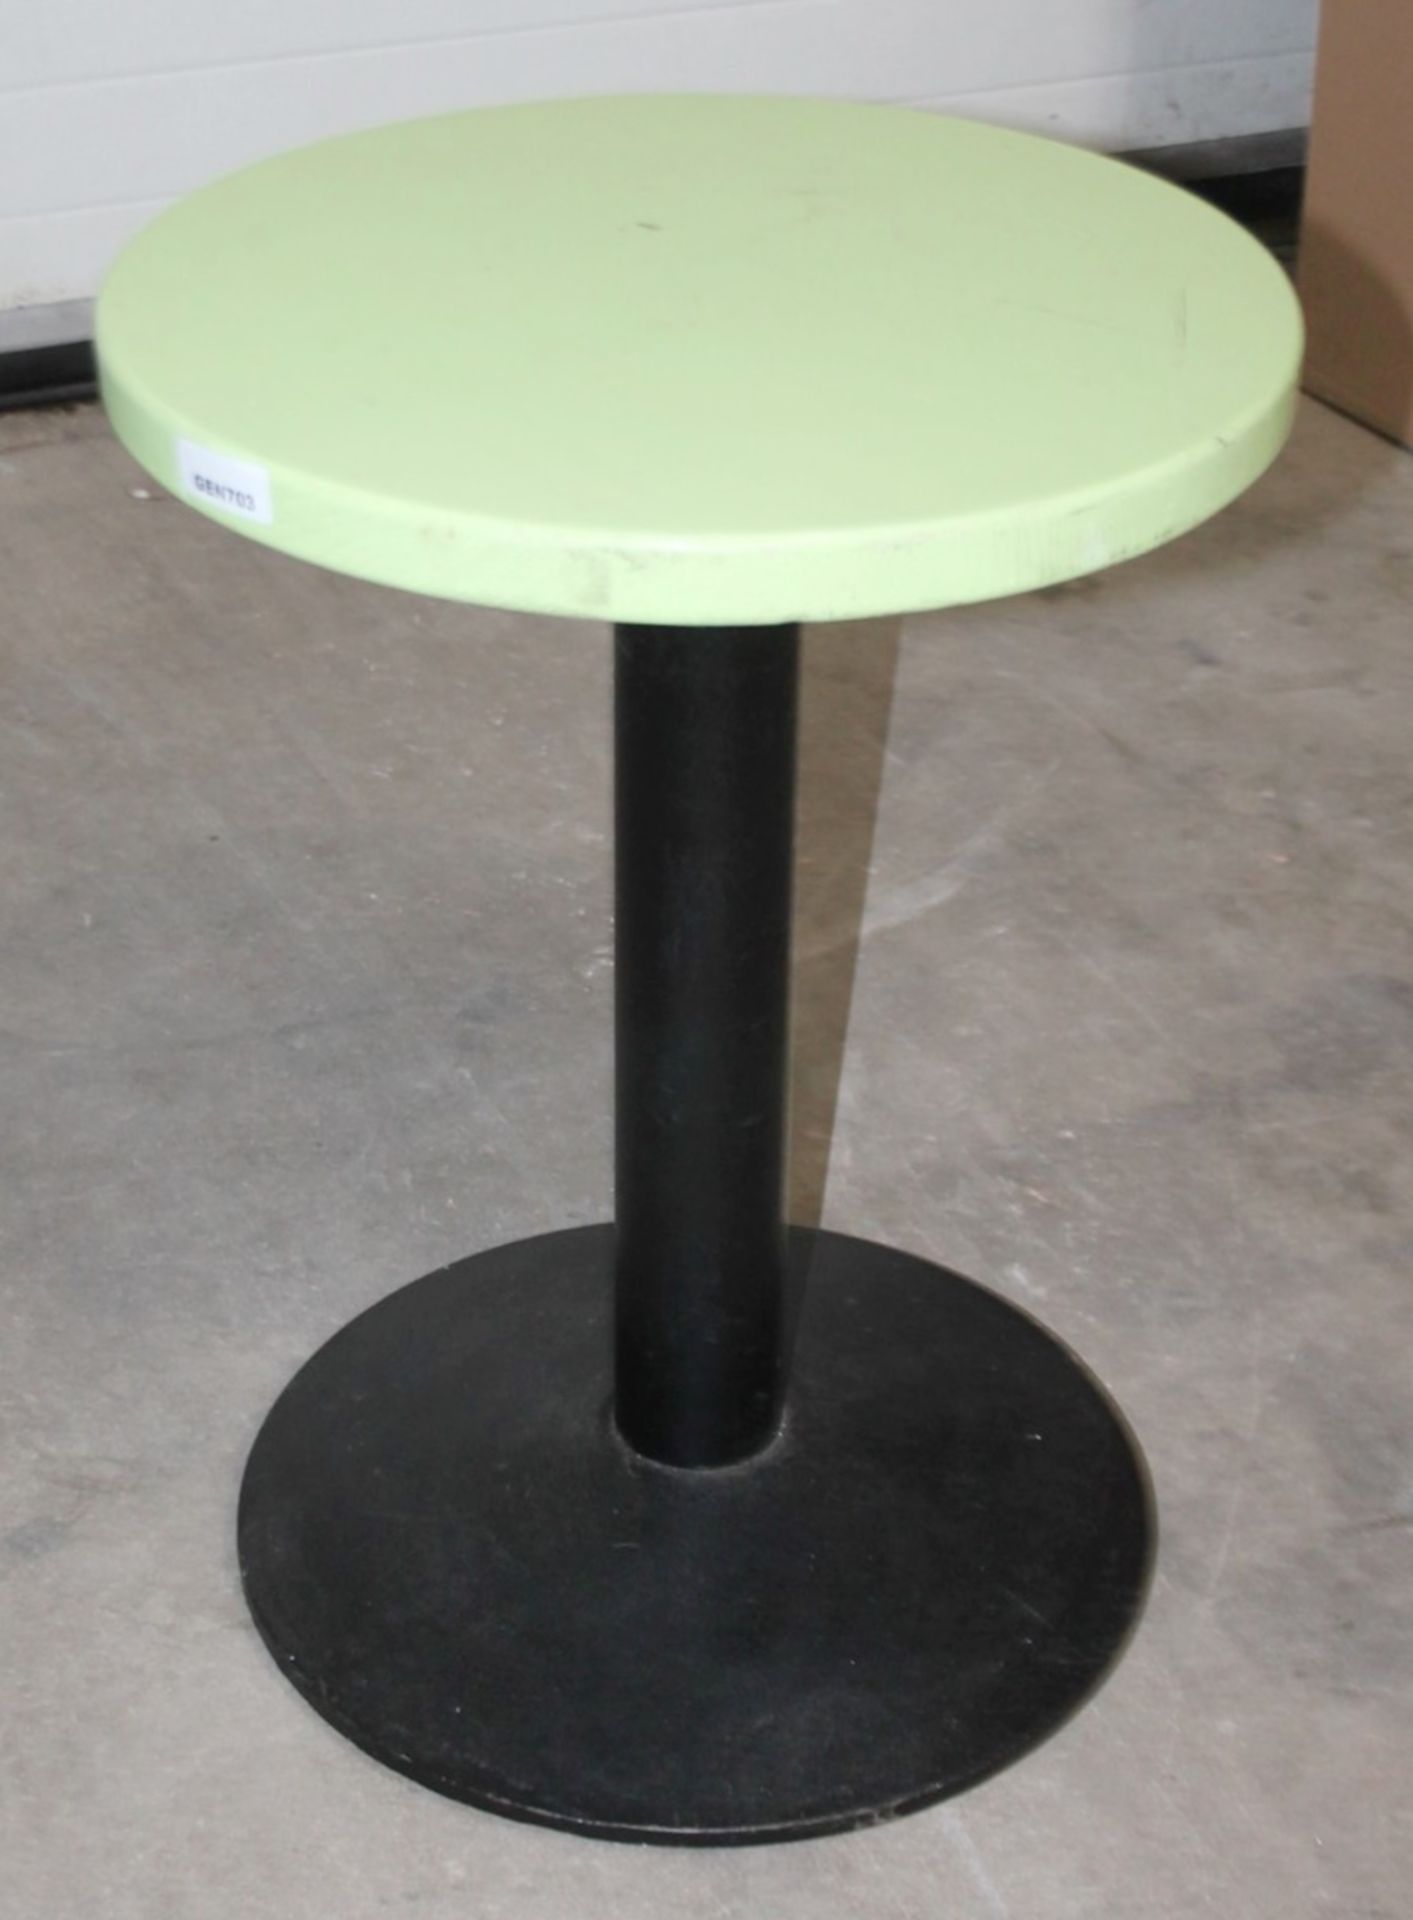 1 x Rustic Low Profile Bespoke Bar Table With A Lime Green Paineted Top - Dimensions: H61 x - Image 4 of 4